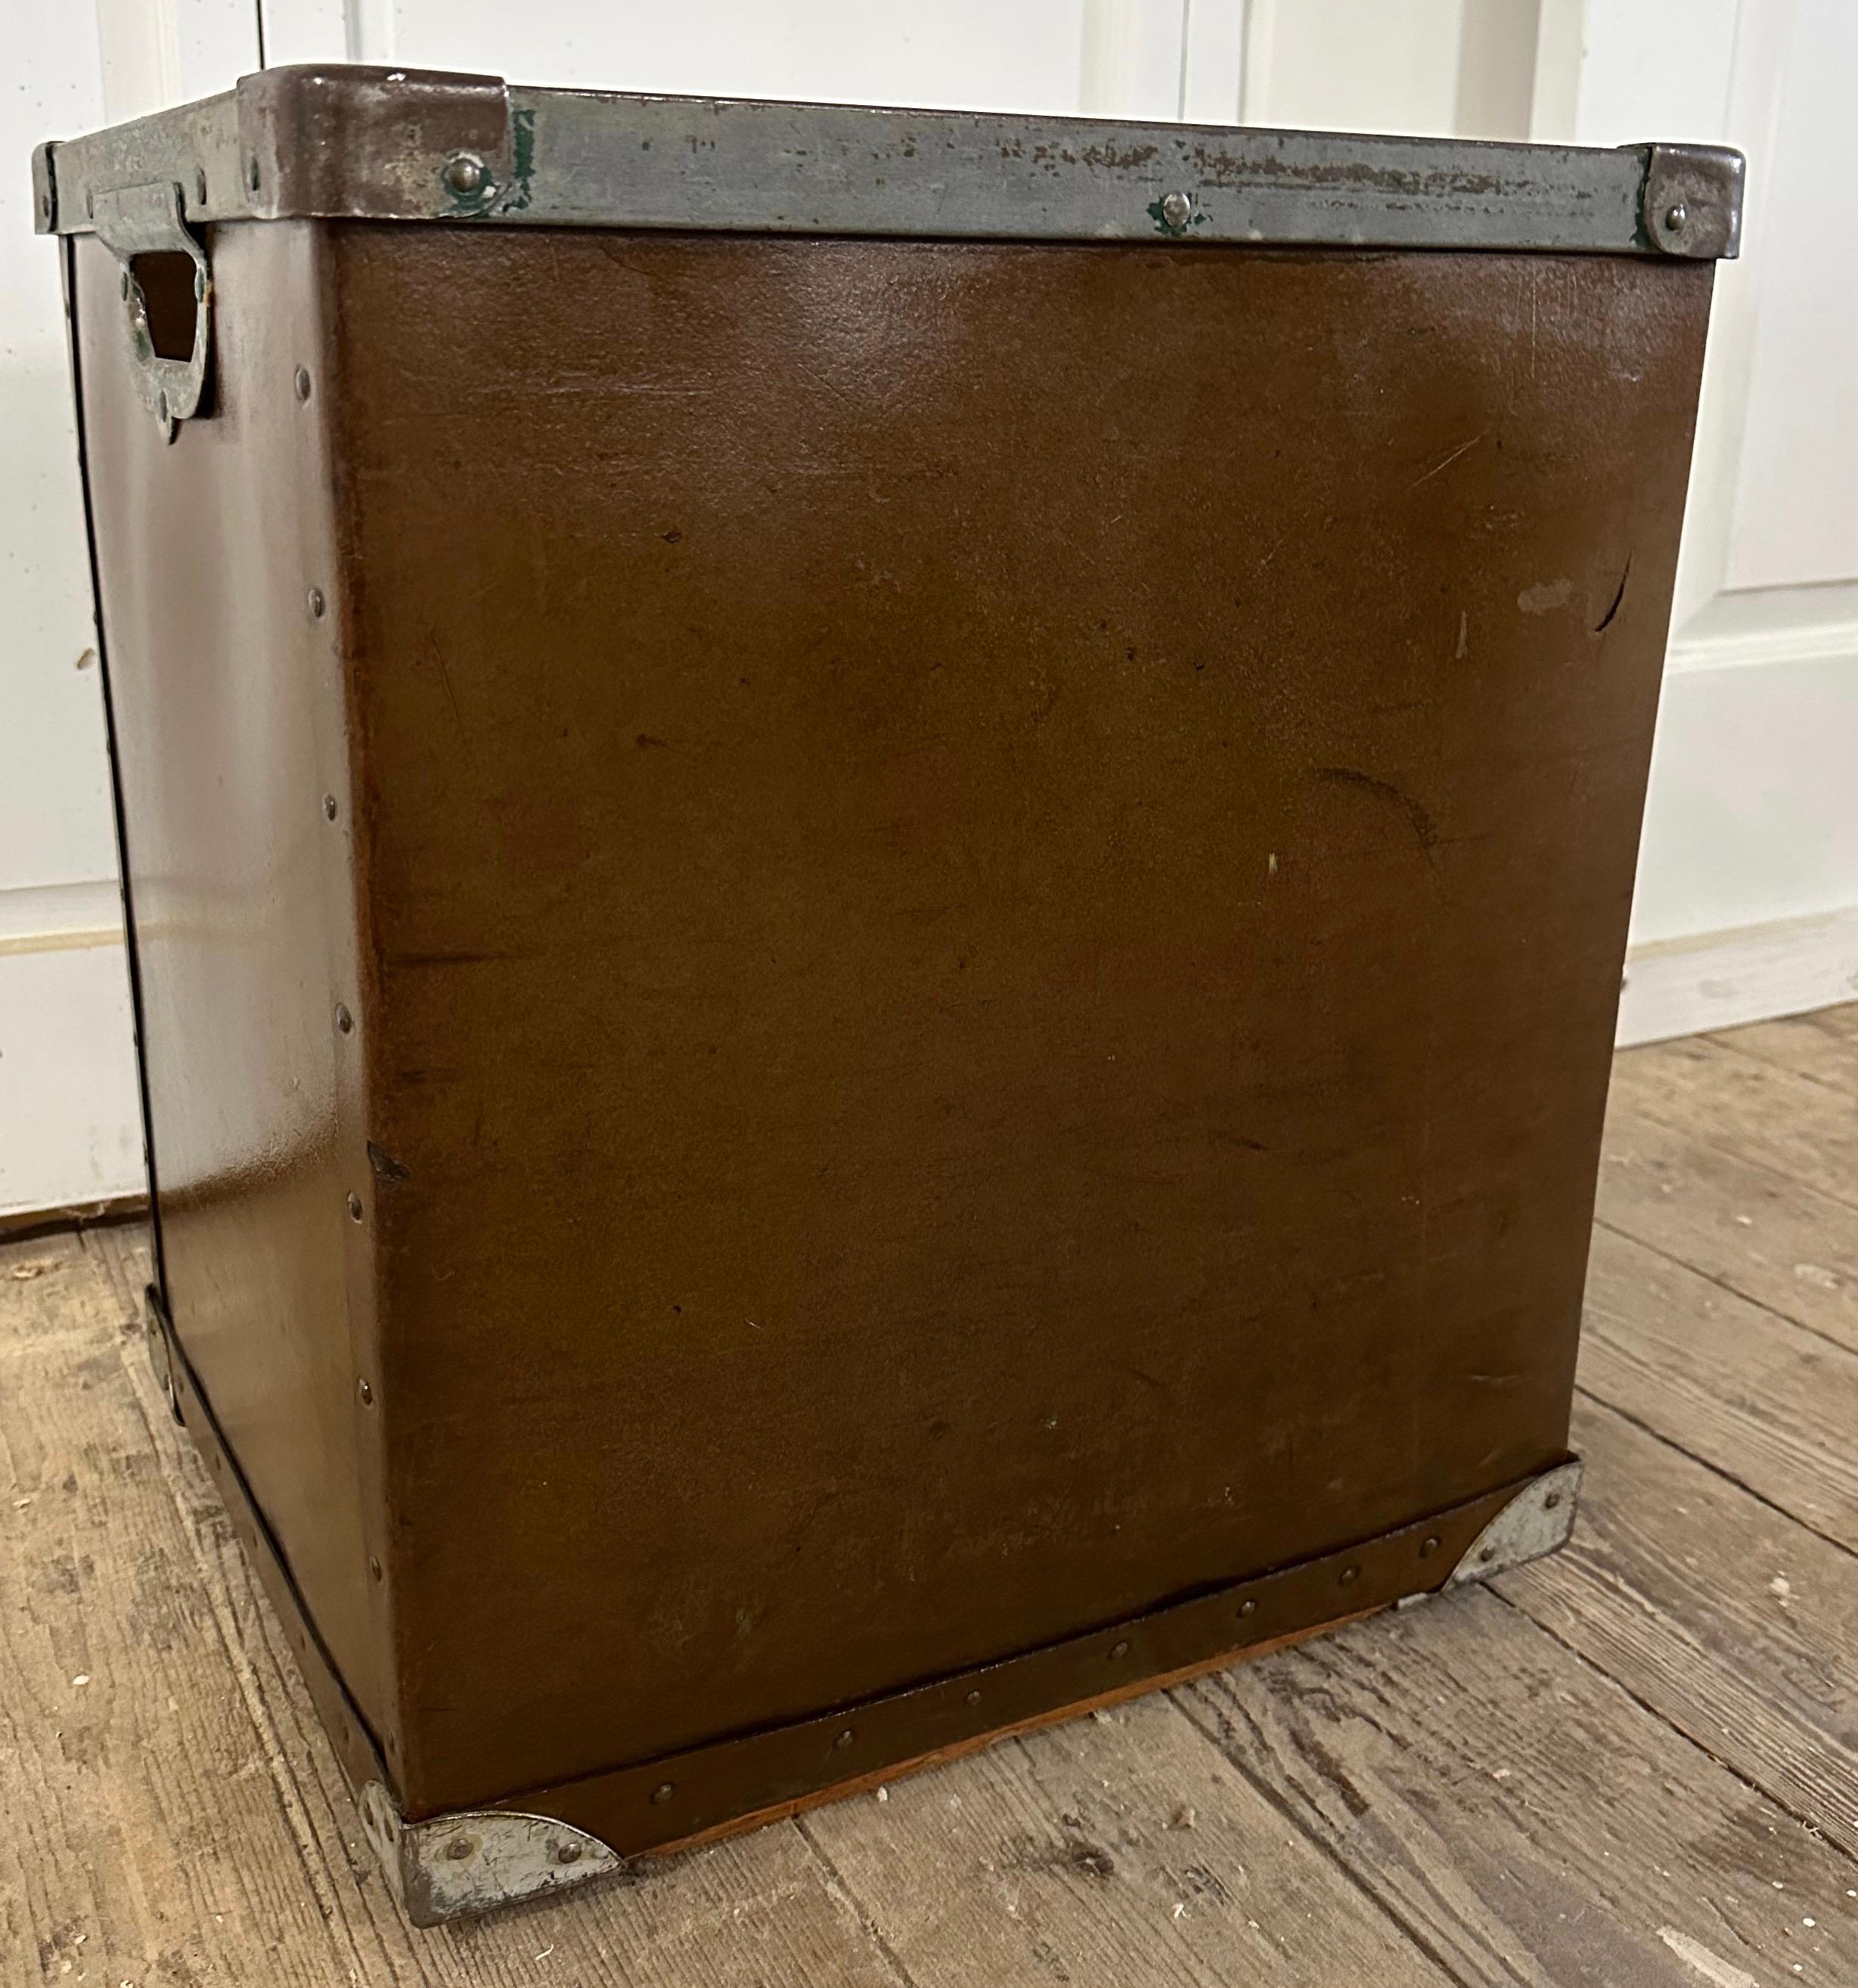 Made by Kennett, this Industrial style mail cart has two-hole handles with iron braces and metal studs. These mail bins or carts were used for sorting mail. Can be used for laundry cart or children toys storage and just any objects hanging around